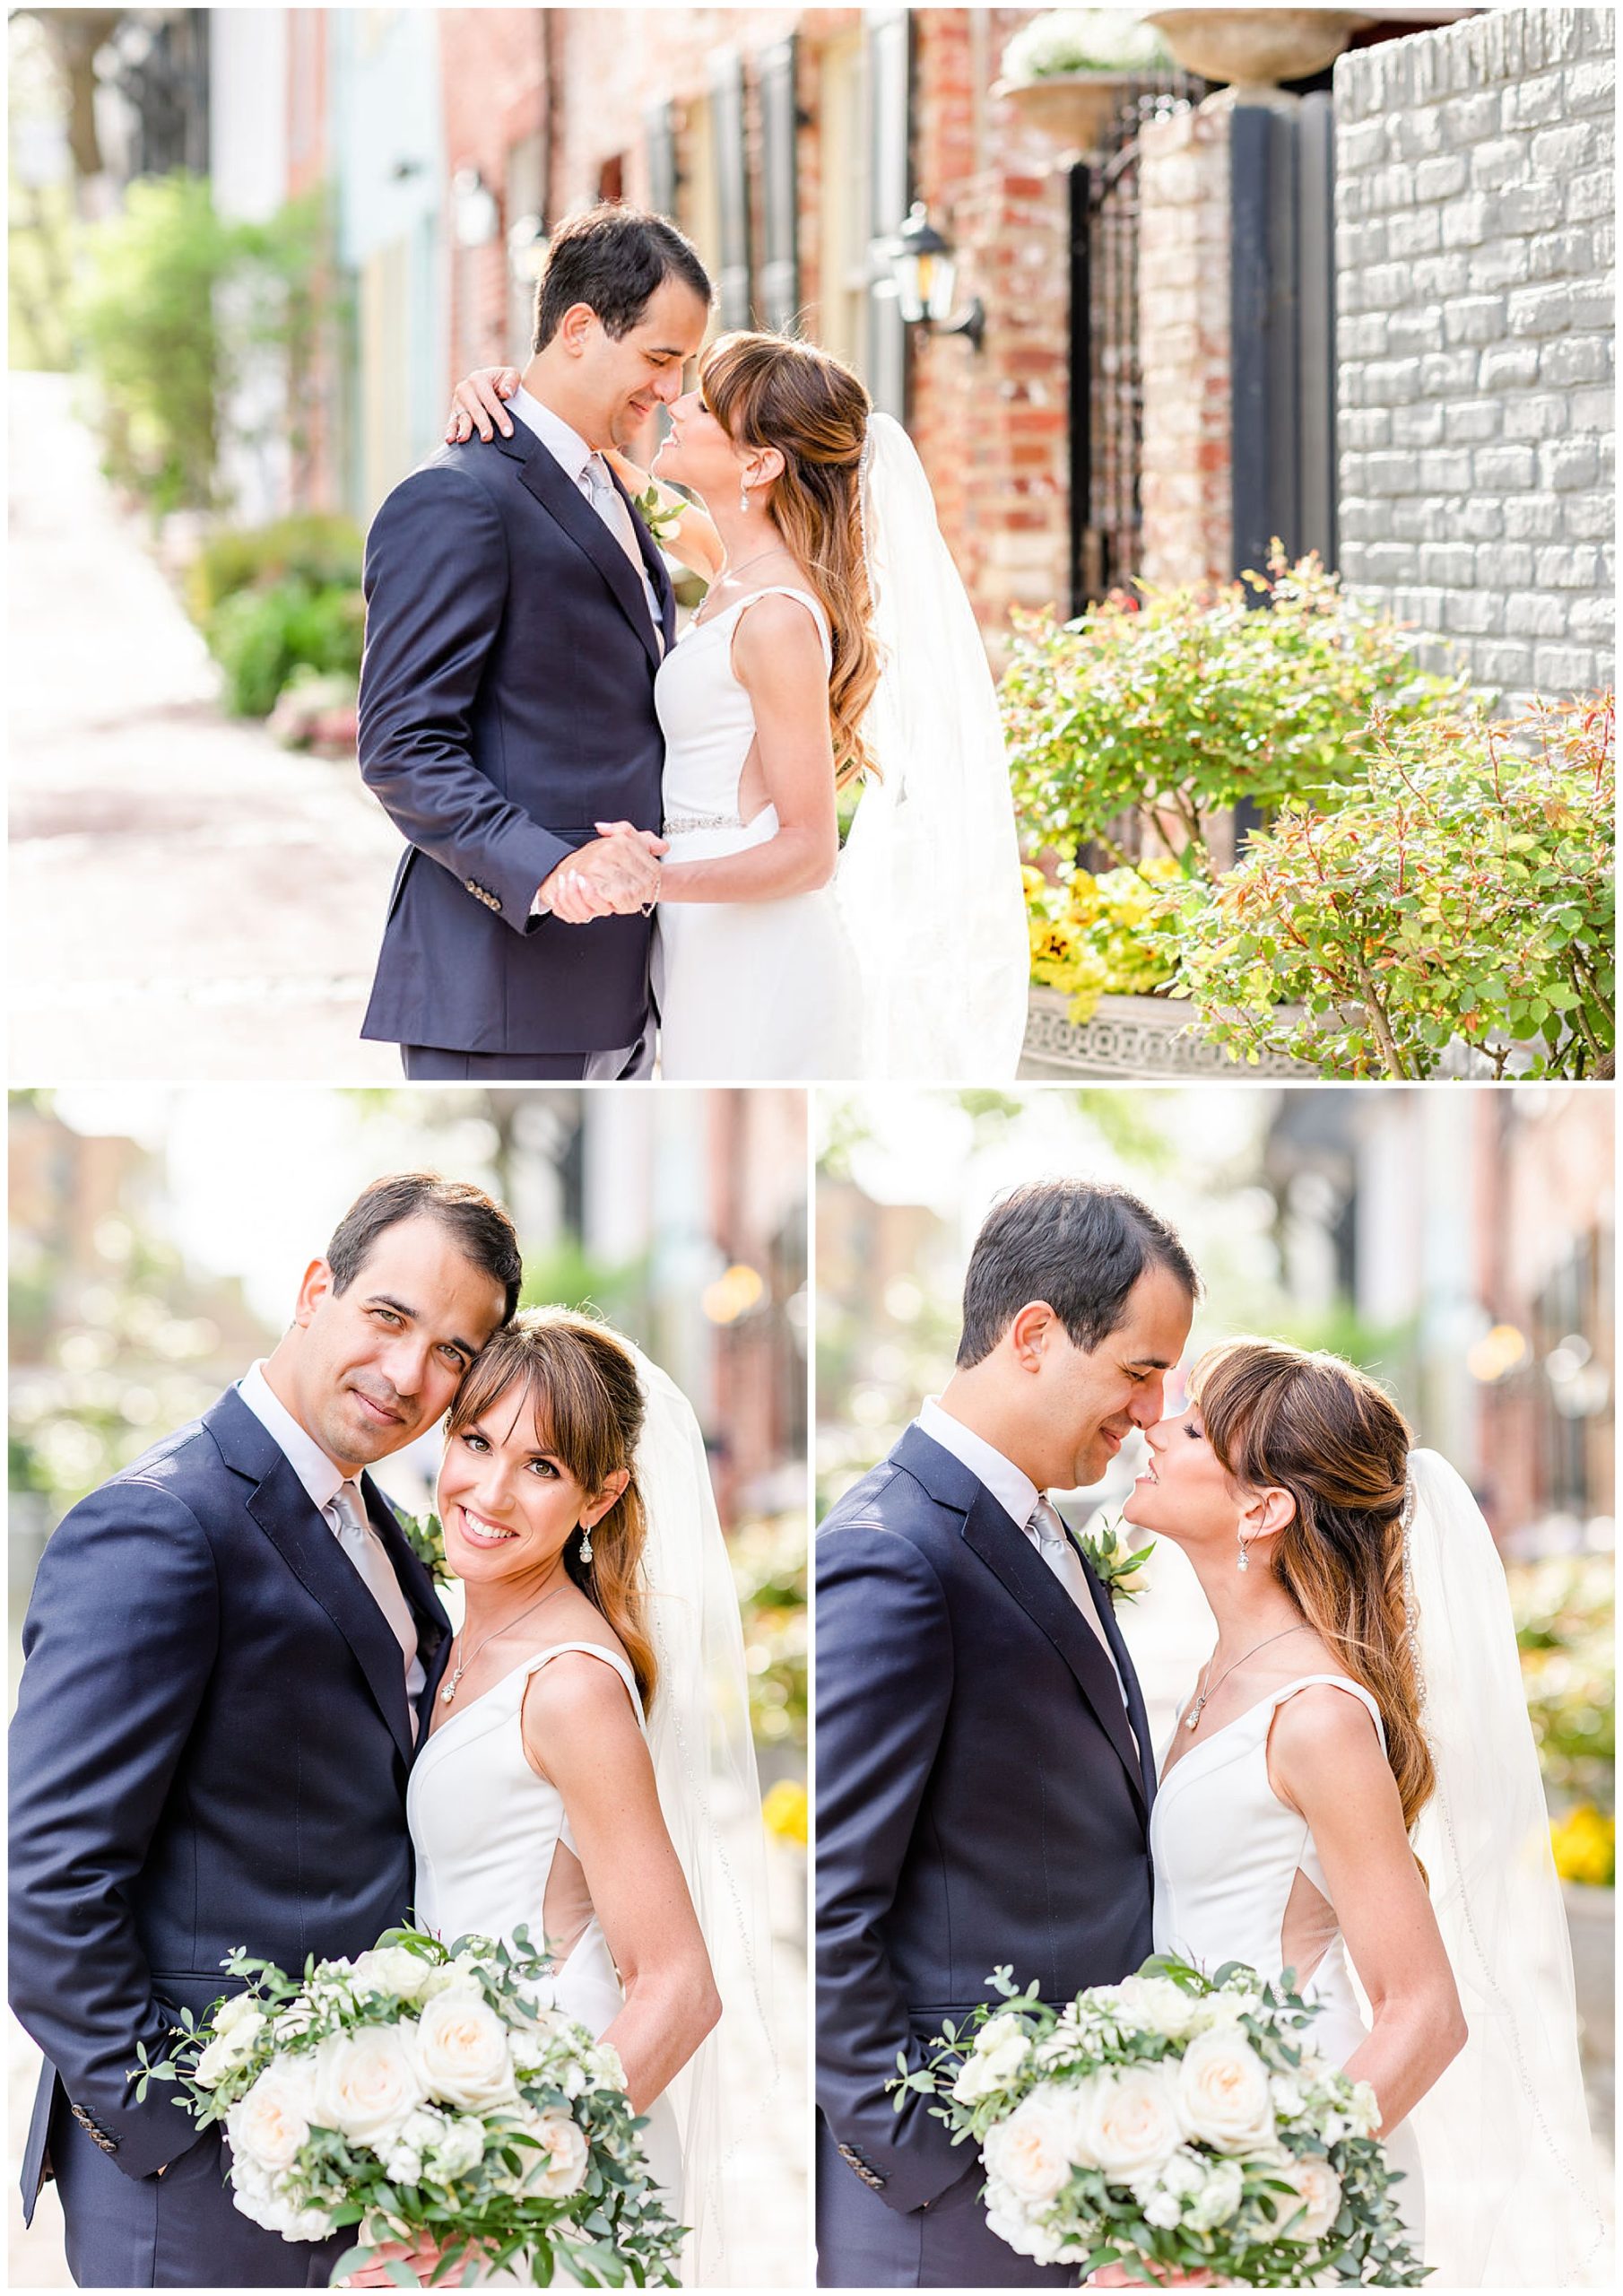 spring Ritz Carlton Georgetown wedding, Georgetown DC wedding, Georgetown Bride, Georgetown couple, DC couple, DC wedding venue, spring wedding, floral focused wedding, classic DC wedding, Ritz Carlton wedding, DC wedding photographer, Georgetown wedding photographer, Rachel E.H. Photography, bride and groom almost kissing, bride and groom with heads together